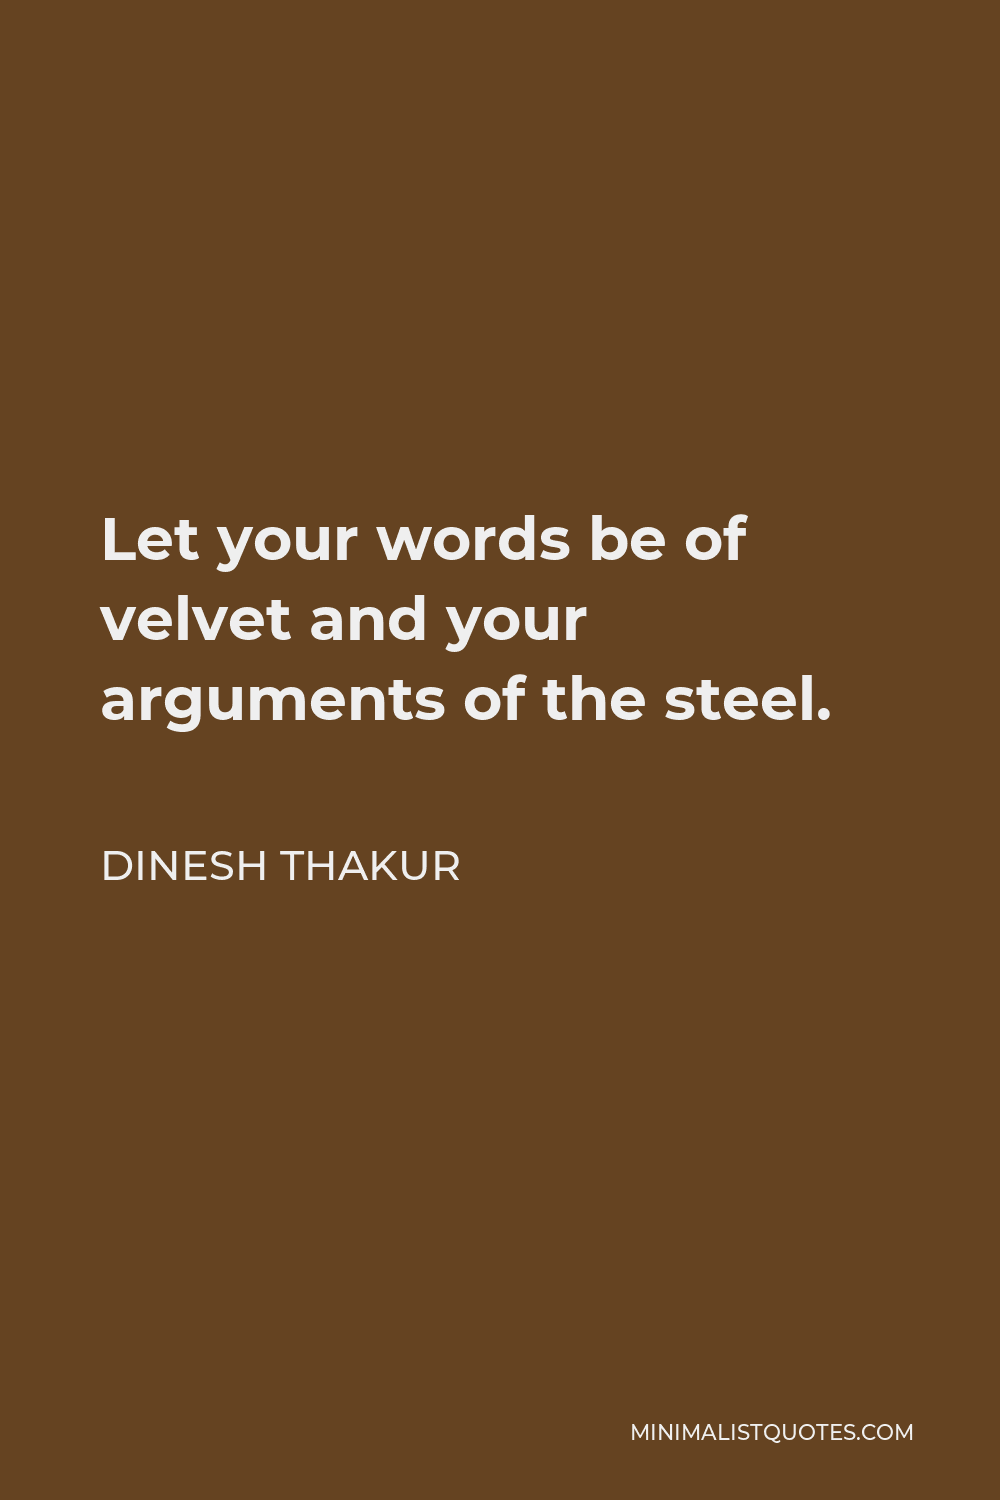 Dinesh Thakur Quote - Let your words be of velvet and your arguments of the steel.